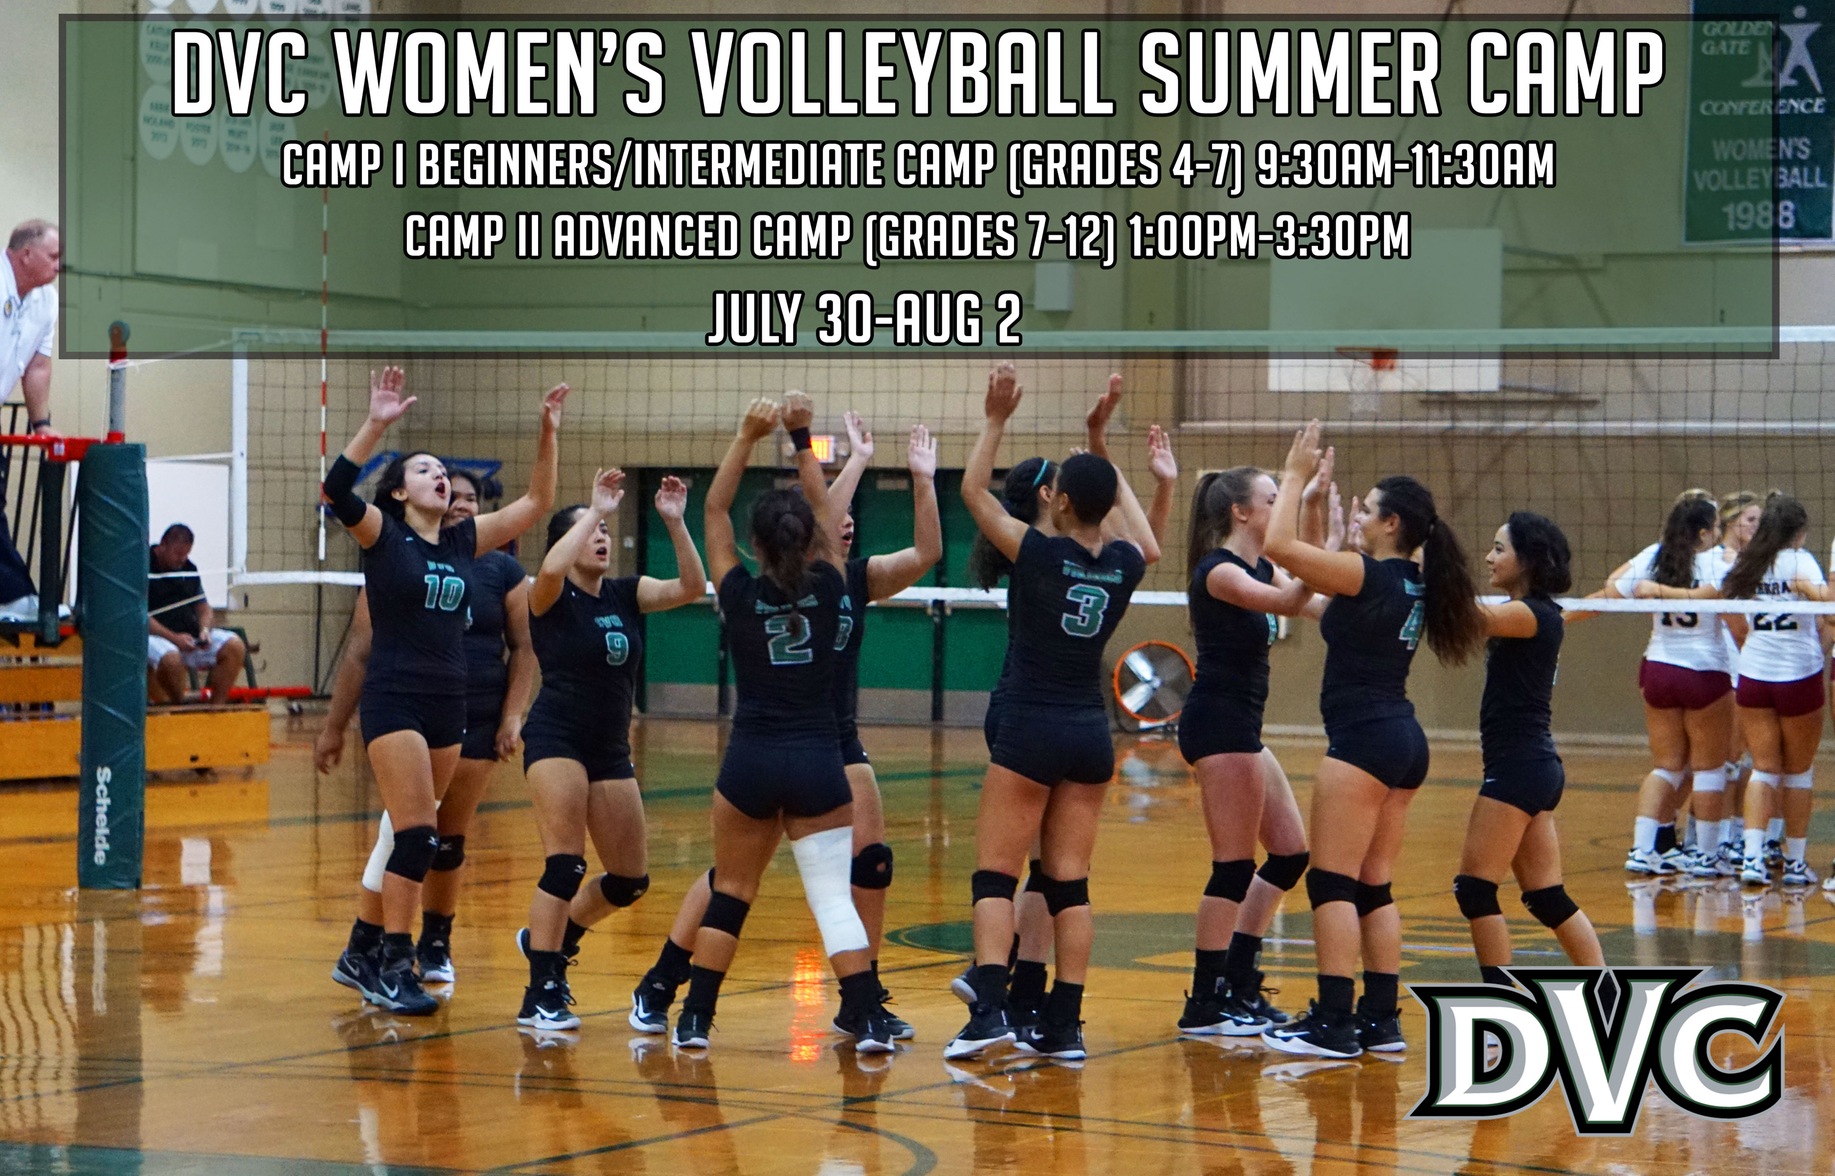 DVC Women's Volleyball Summer Camp July 30-Aug 2